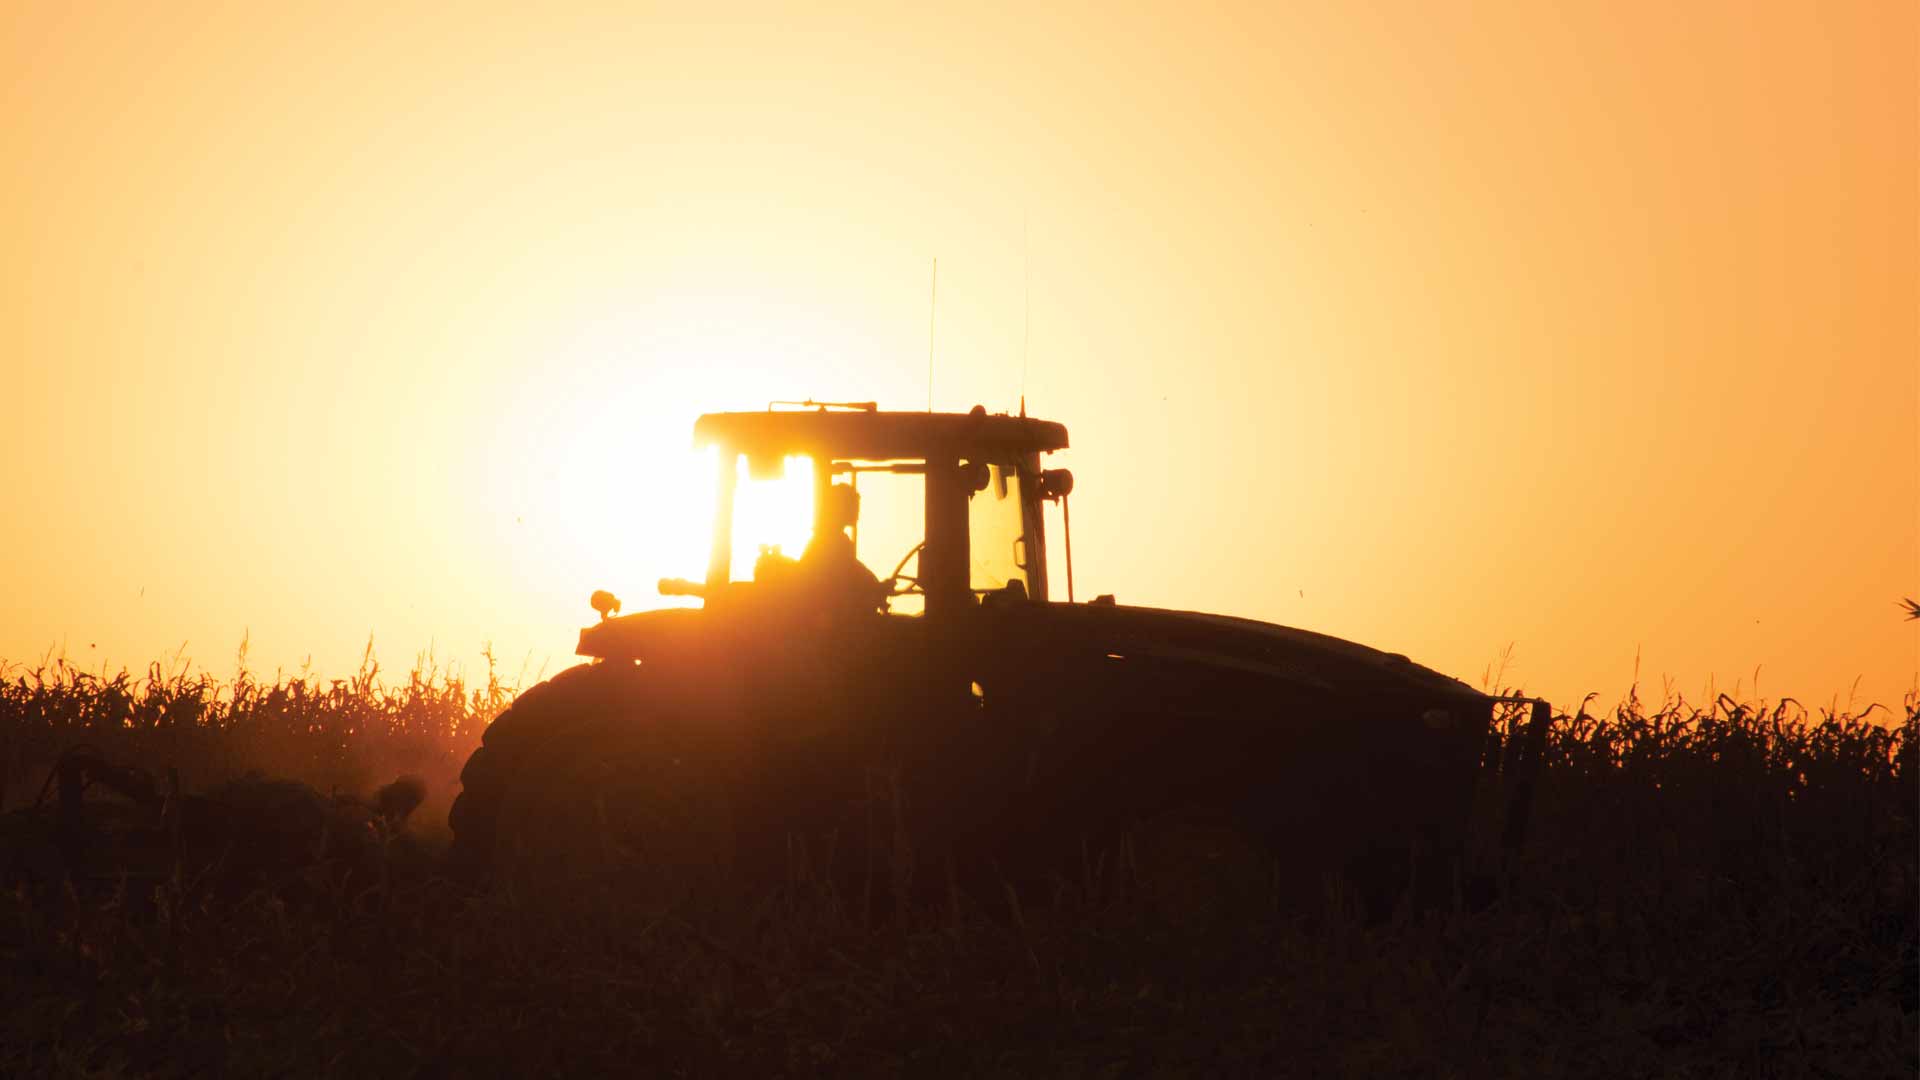 A tractor in field at sunset